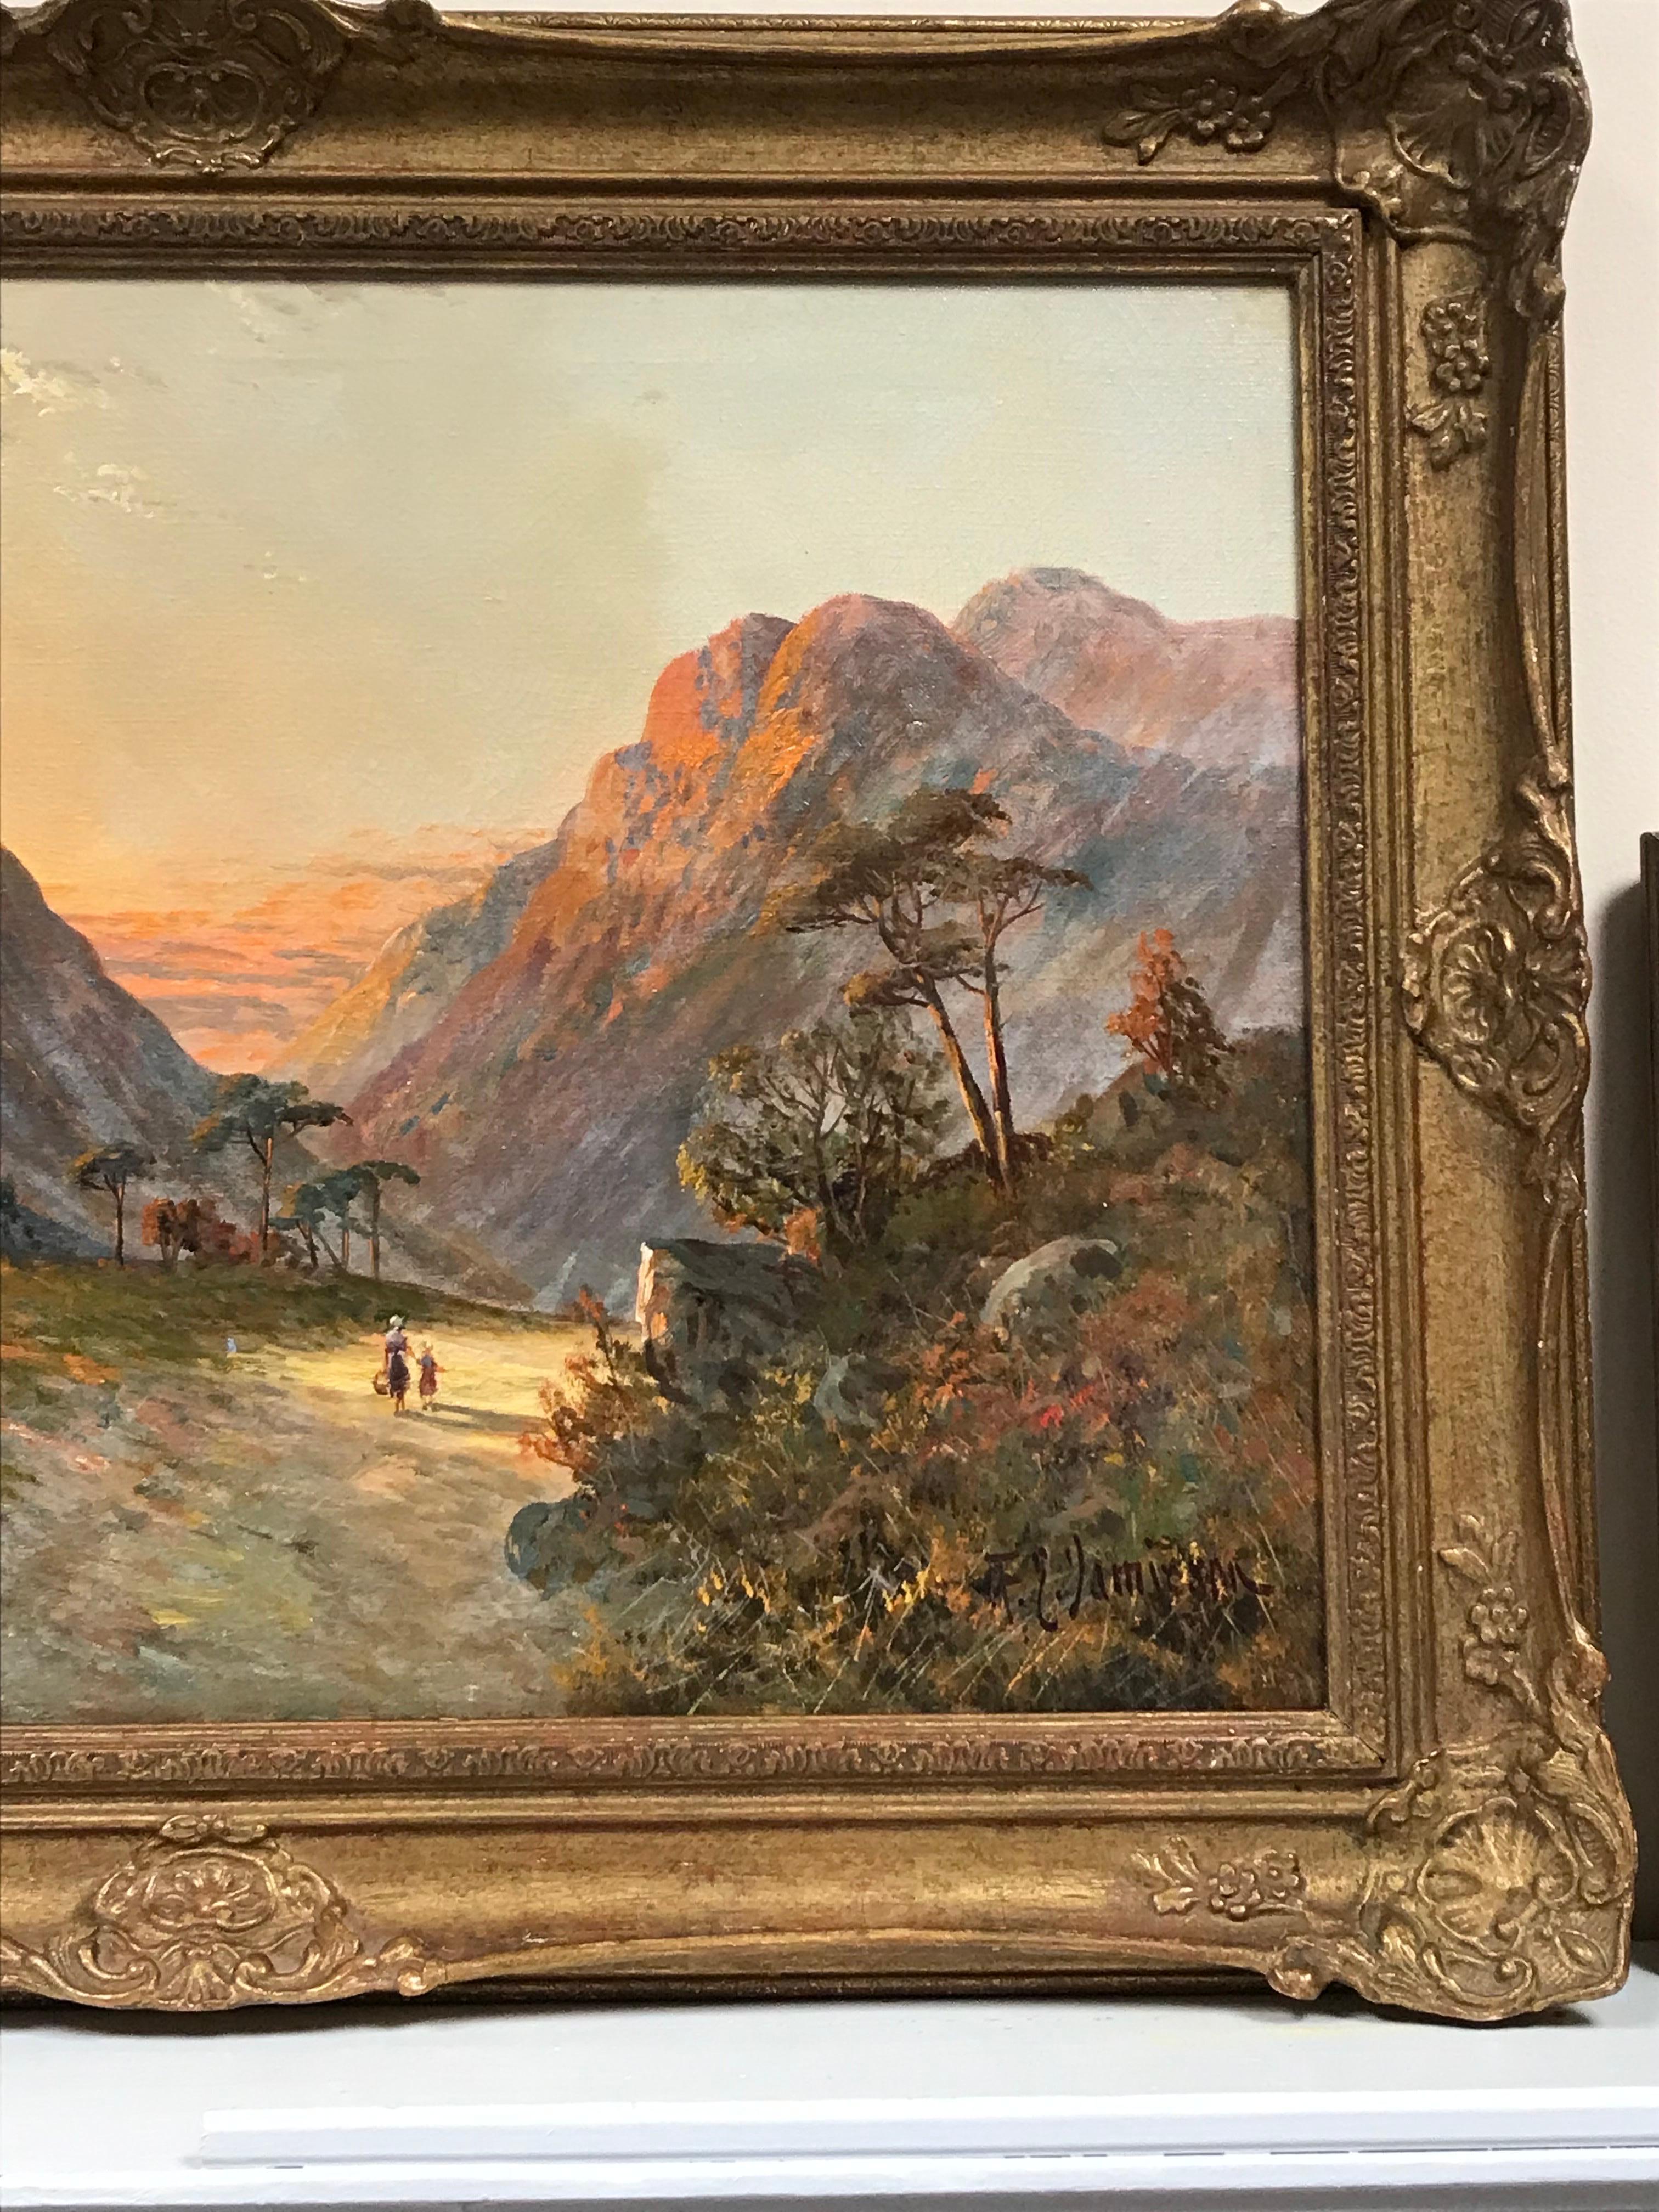 Artist/ School: F. E. Jamieson (British 1895-1950), signed

Title: 'Returning Home', a mother and child returning home along the riverside pathway through a mountain glen at sunset. 

Medium: signed oil painting on canvas, framed

framed: 21.5 x